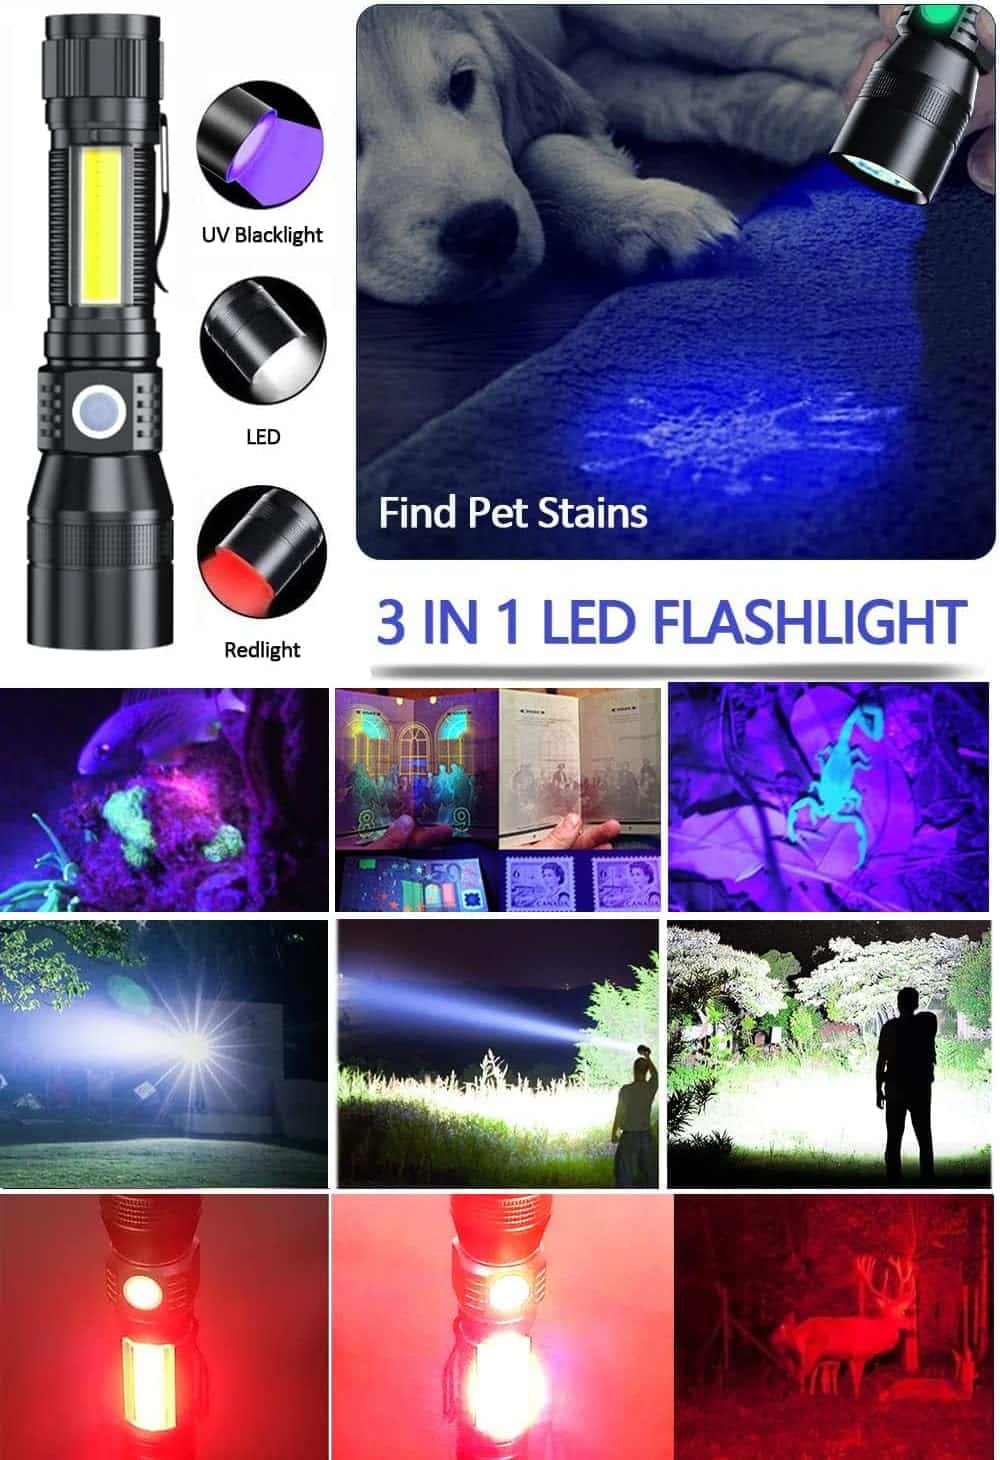 Black Light UV Flashlight Rechargeable, 3in1 Super Bright Tactical Flashlights LED UV Black Light Redlight, 2000Lumen 7Modes, Zoomable, Waterproof Pocket Flashlight for Pet Stains Detection,Camping